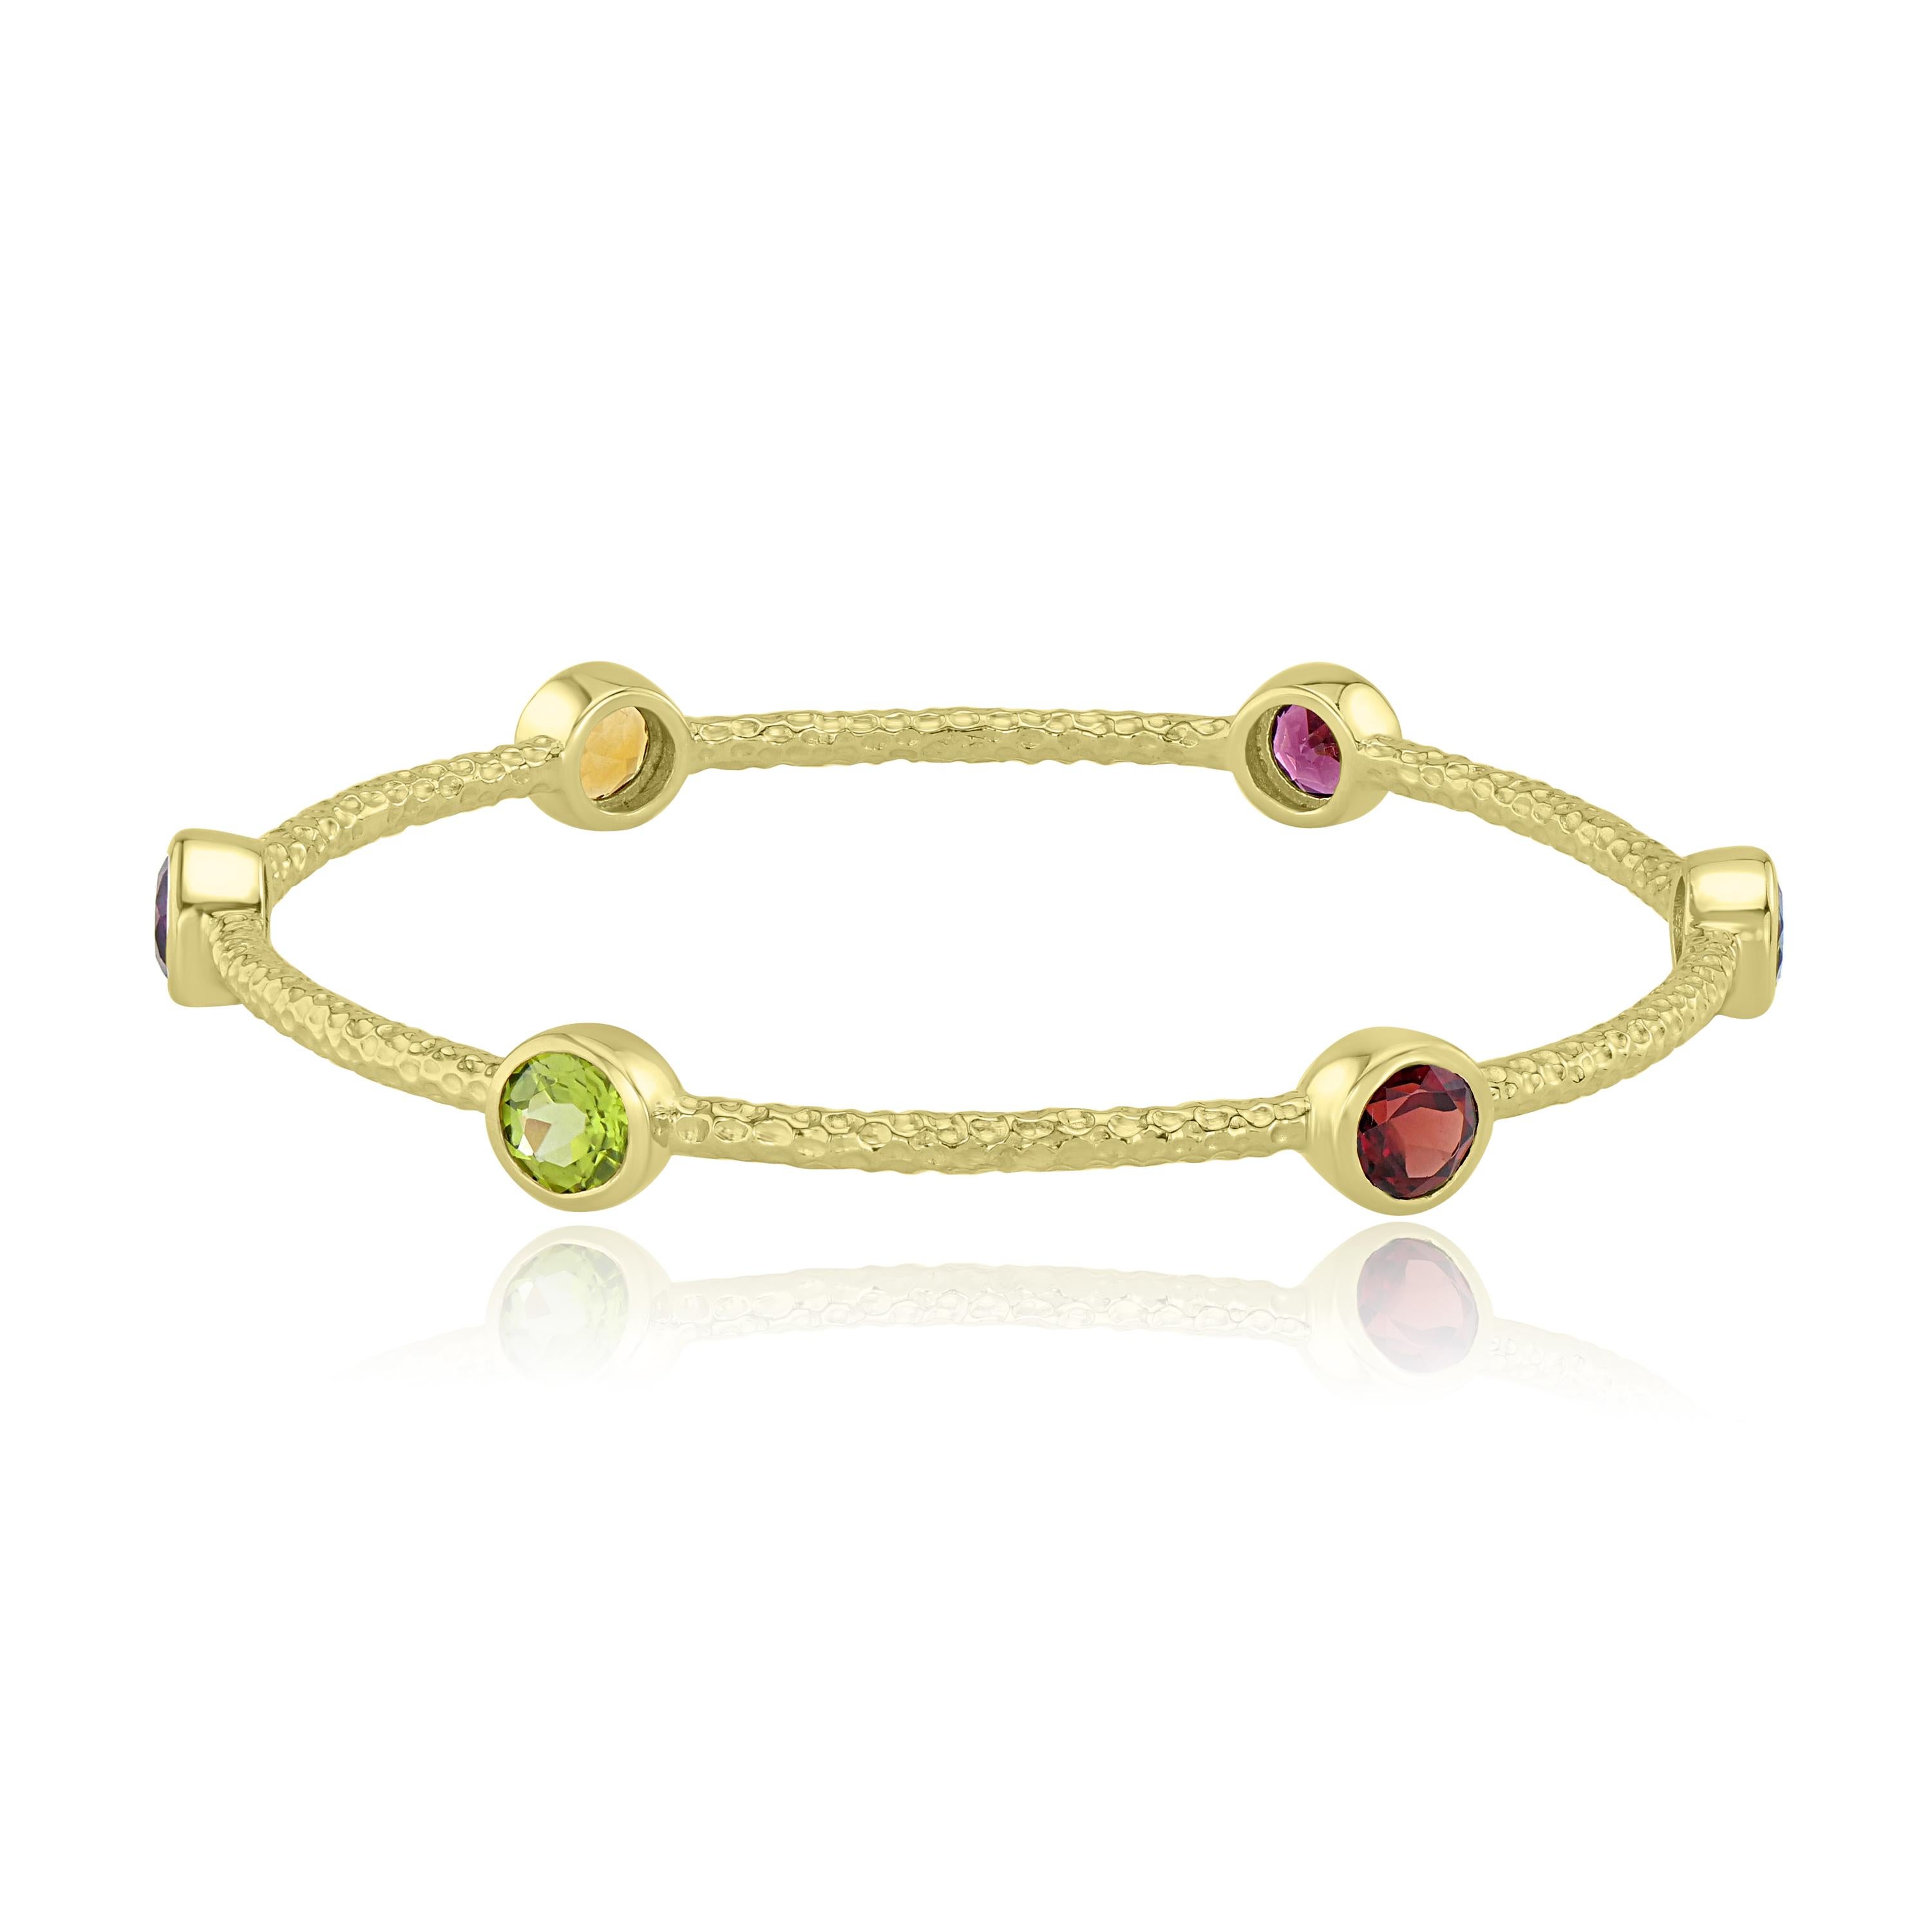 This women's bangle shines with each 6 mm round Citrine, amethyst, peridot, garnet, Swiss blue topaz and rhodolite bezel set. Crafted in genuine and nickel free 925 sterling silver.
JEWELRY SPECIFICATION:
Approx. Gross Weight: 10.61 gram
Approx,